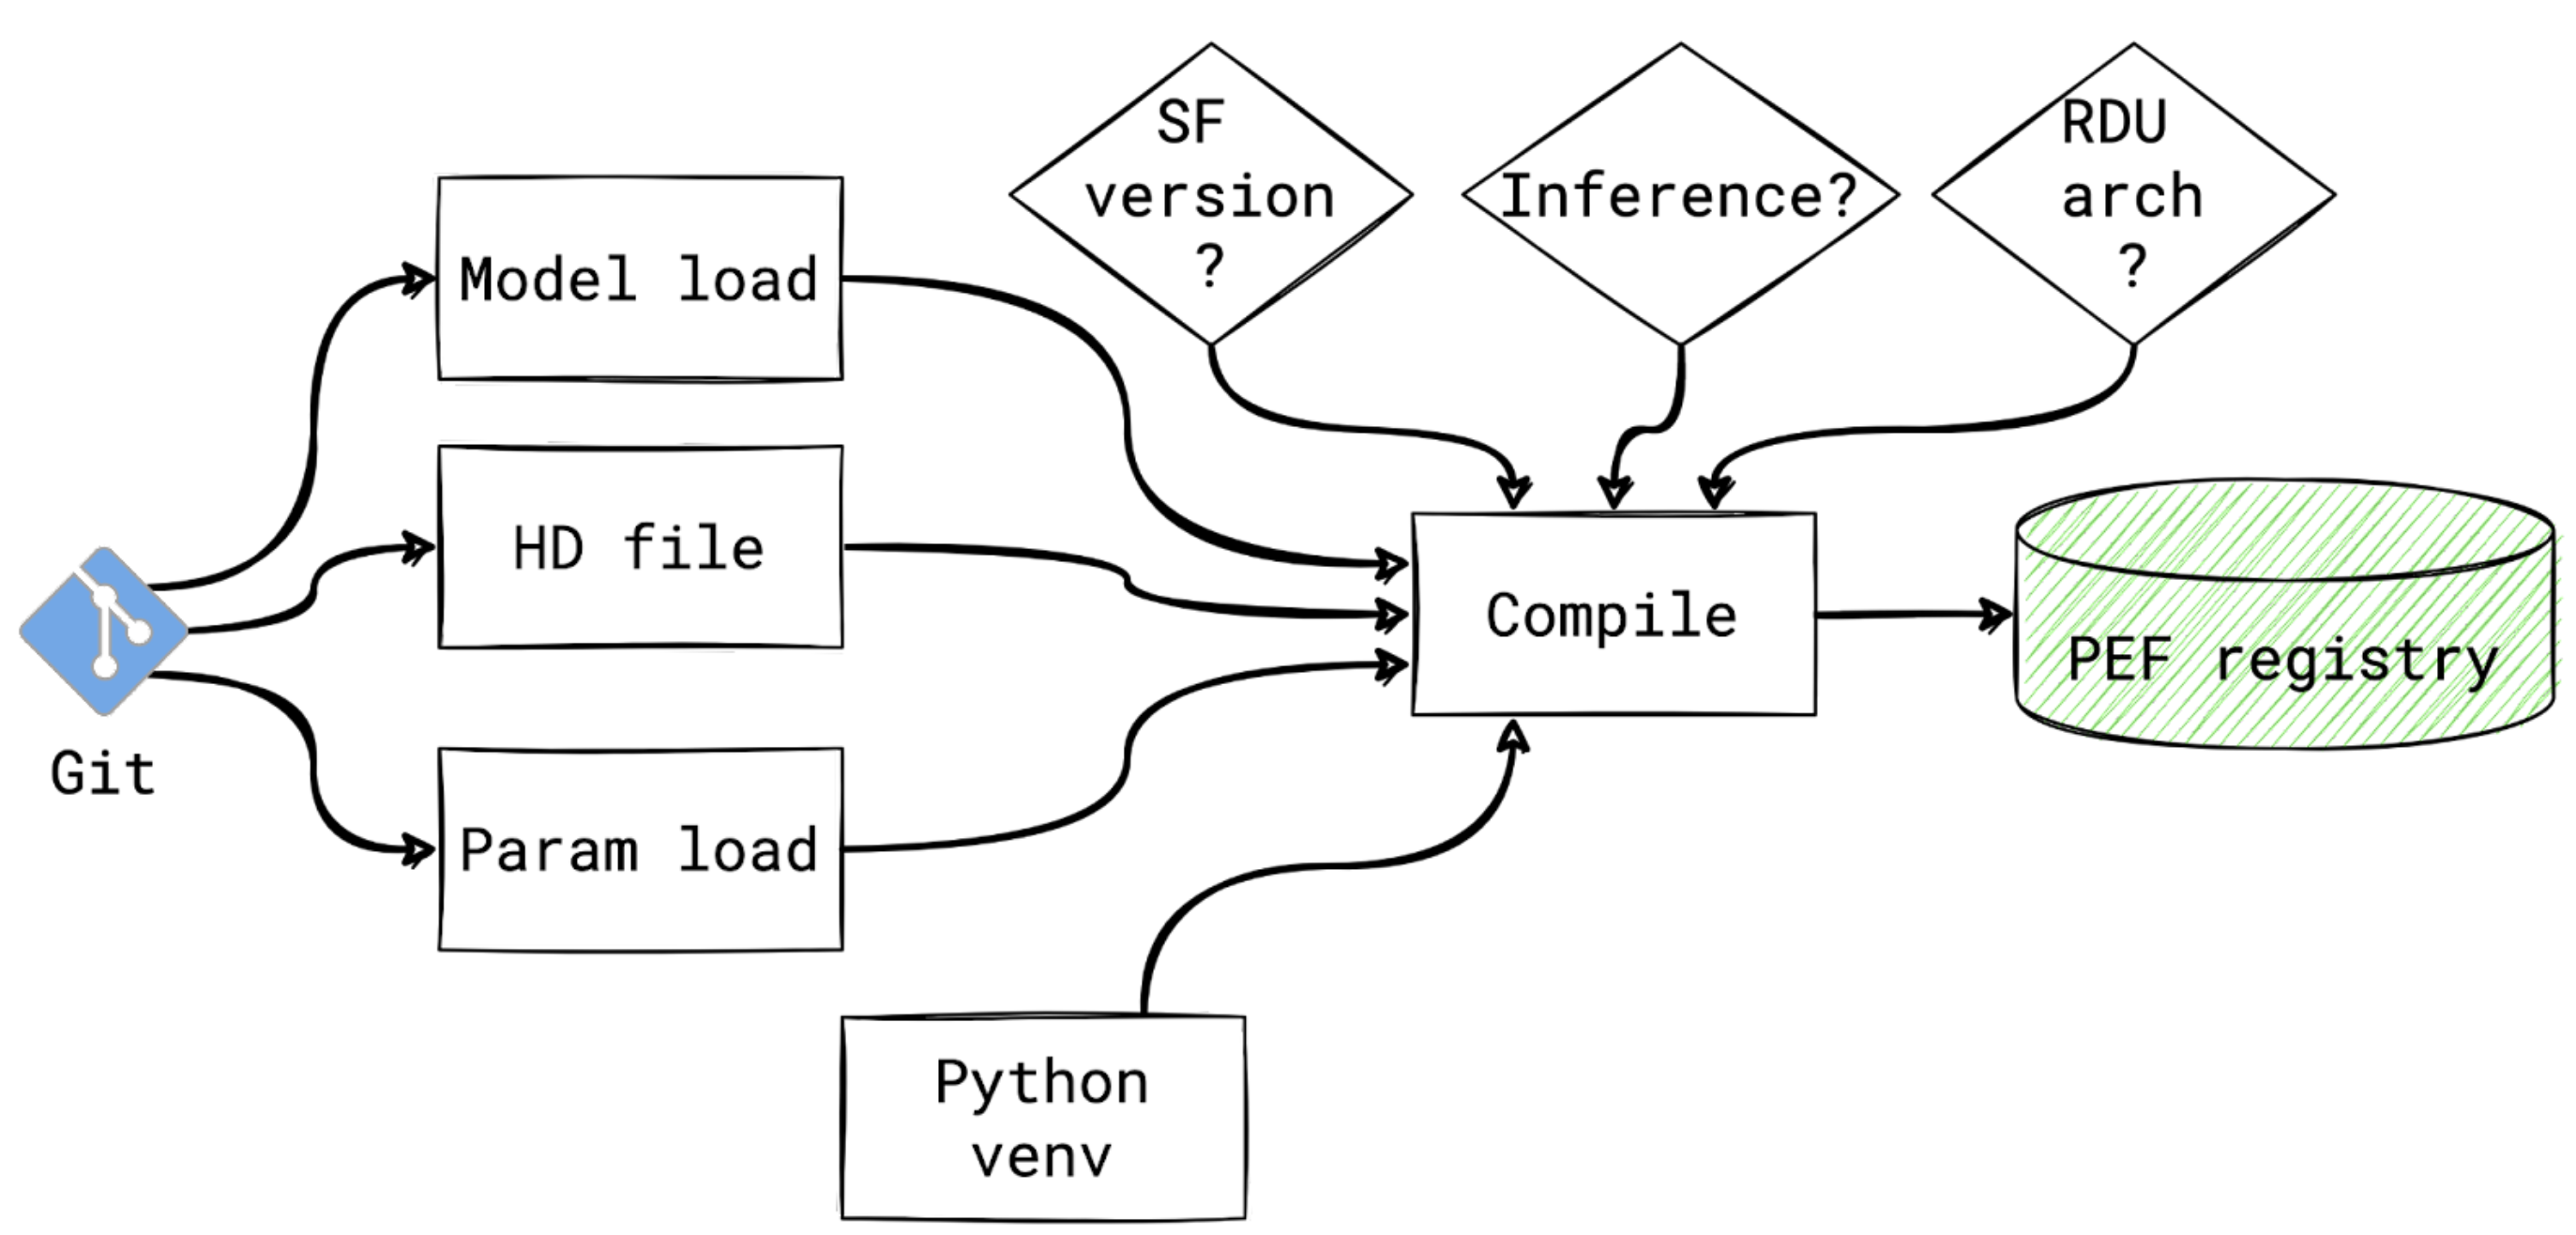 Diagram of the workflow explained in the text next